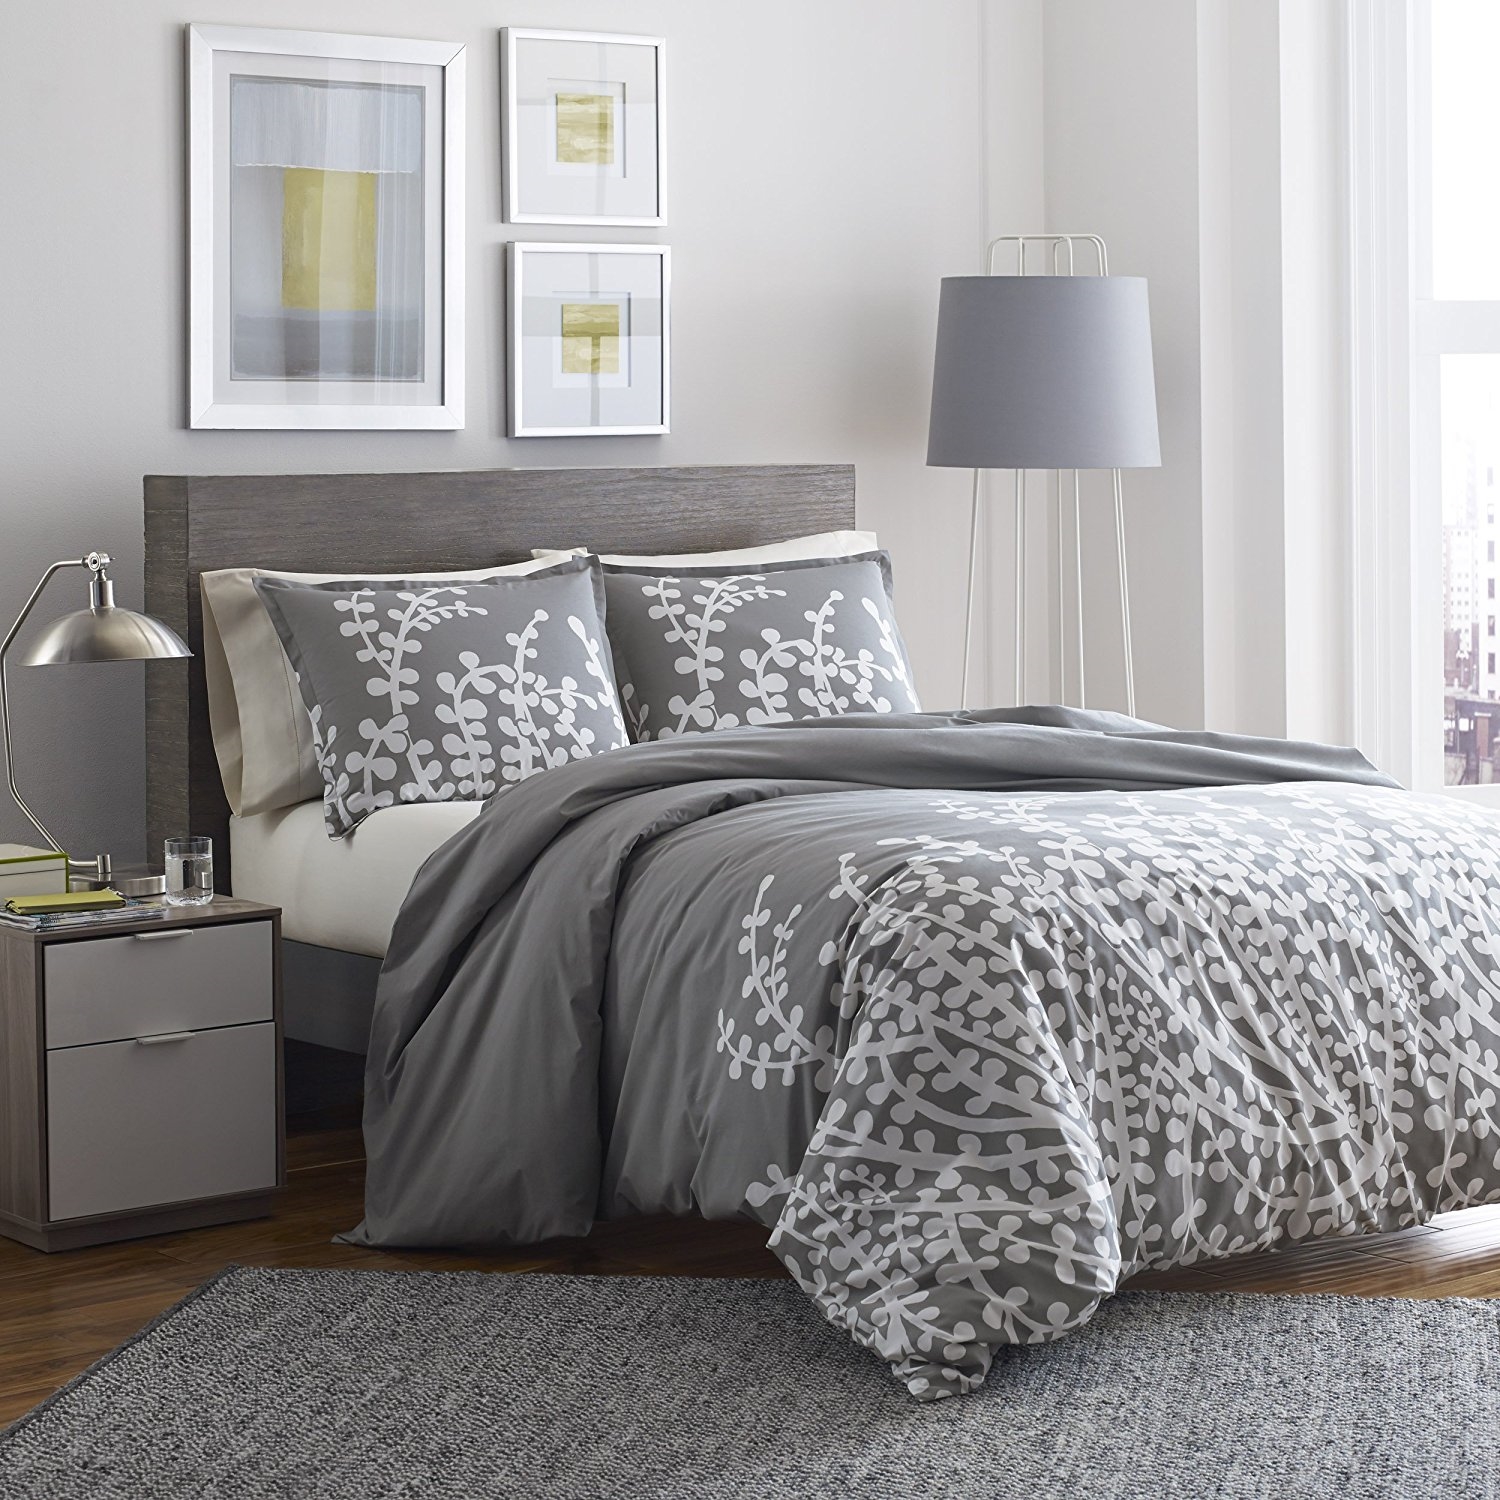 King 3-Piece Cotton Comforter Set with Gray White Floral Branch Pattern |  FastFurnishings.com